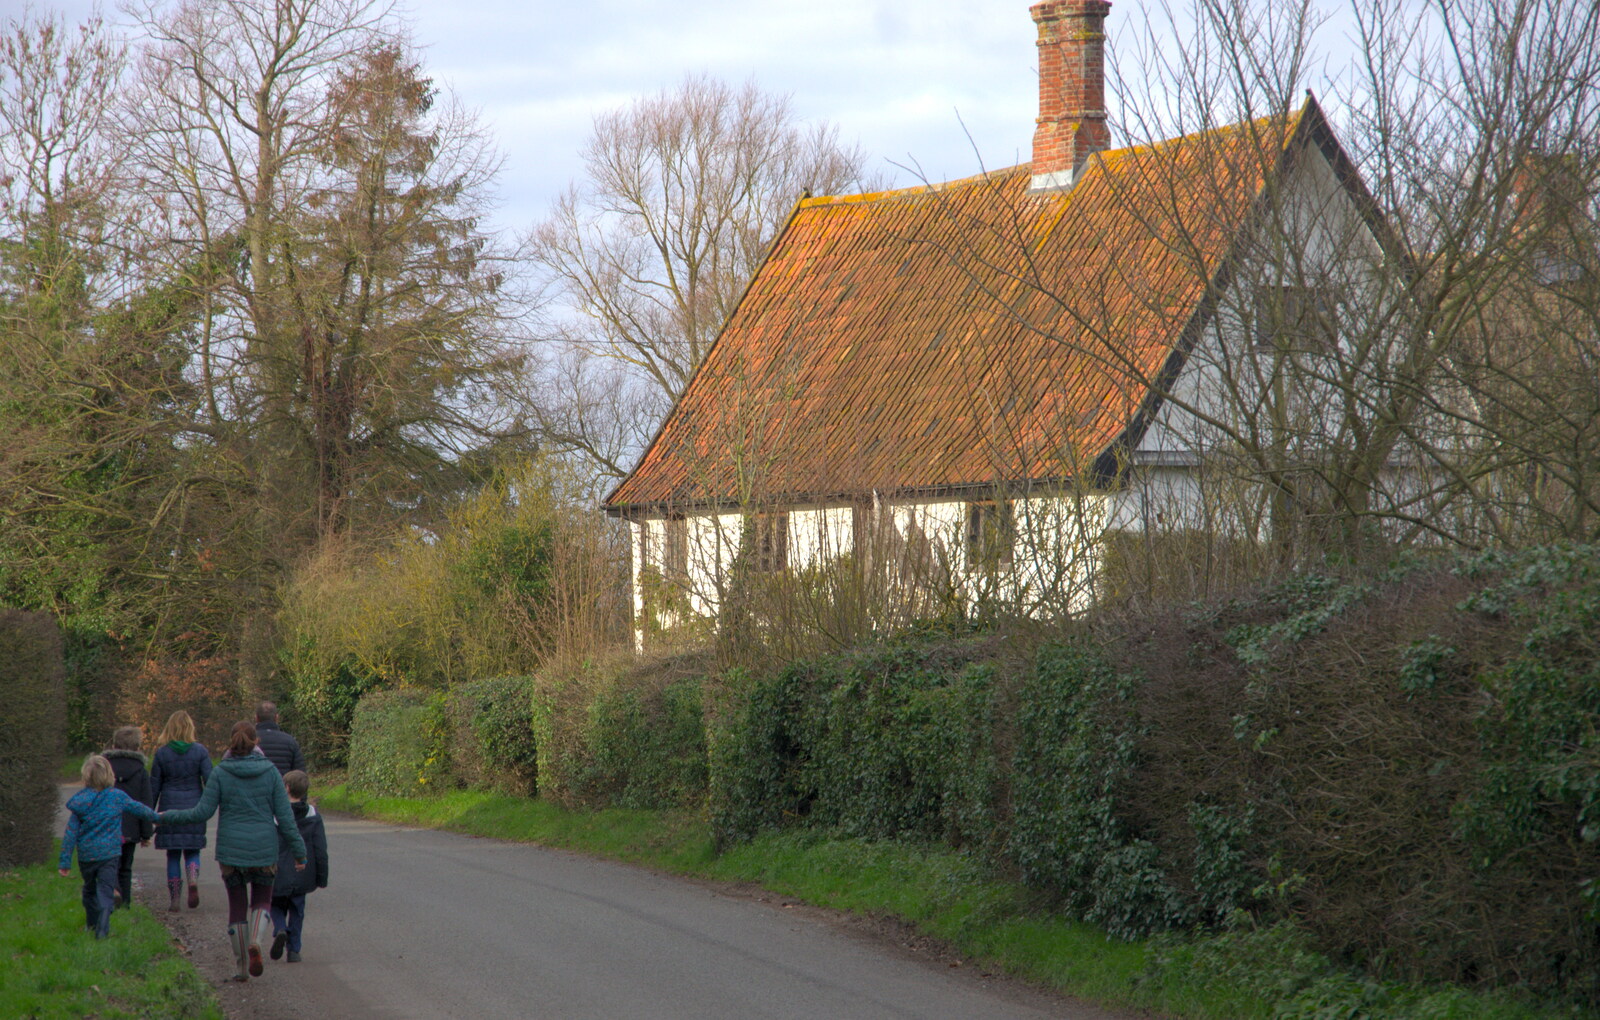 We walk back up the lane, past Dr. Vickary's house from New Year's Eve and Day, Brome, Suffolk - 1st January 2019